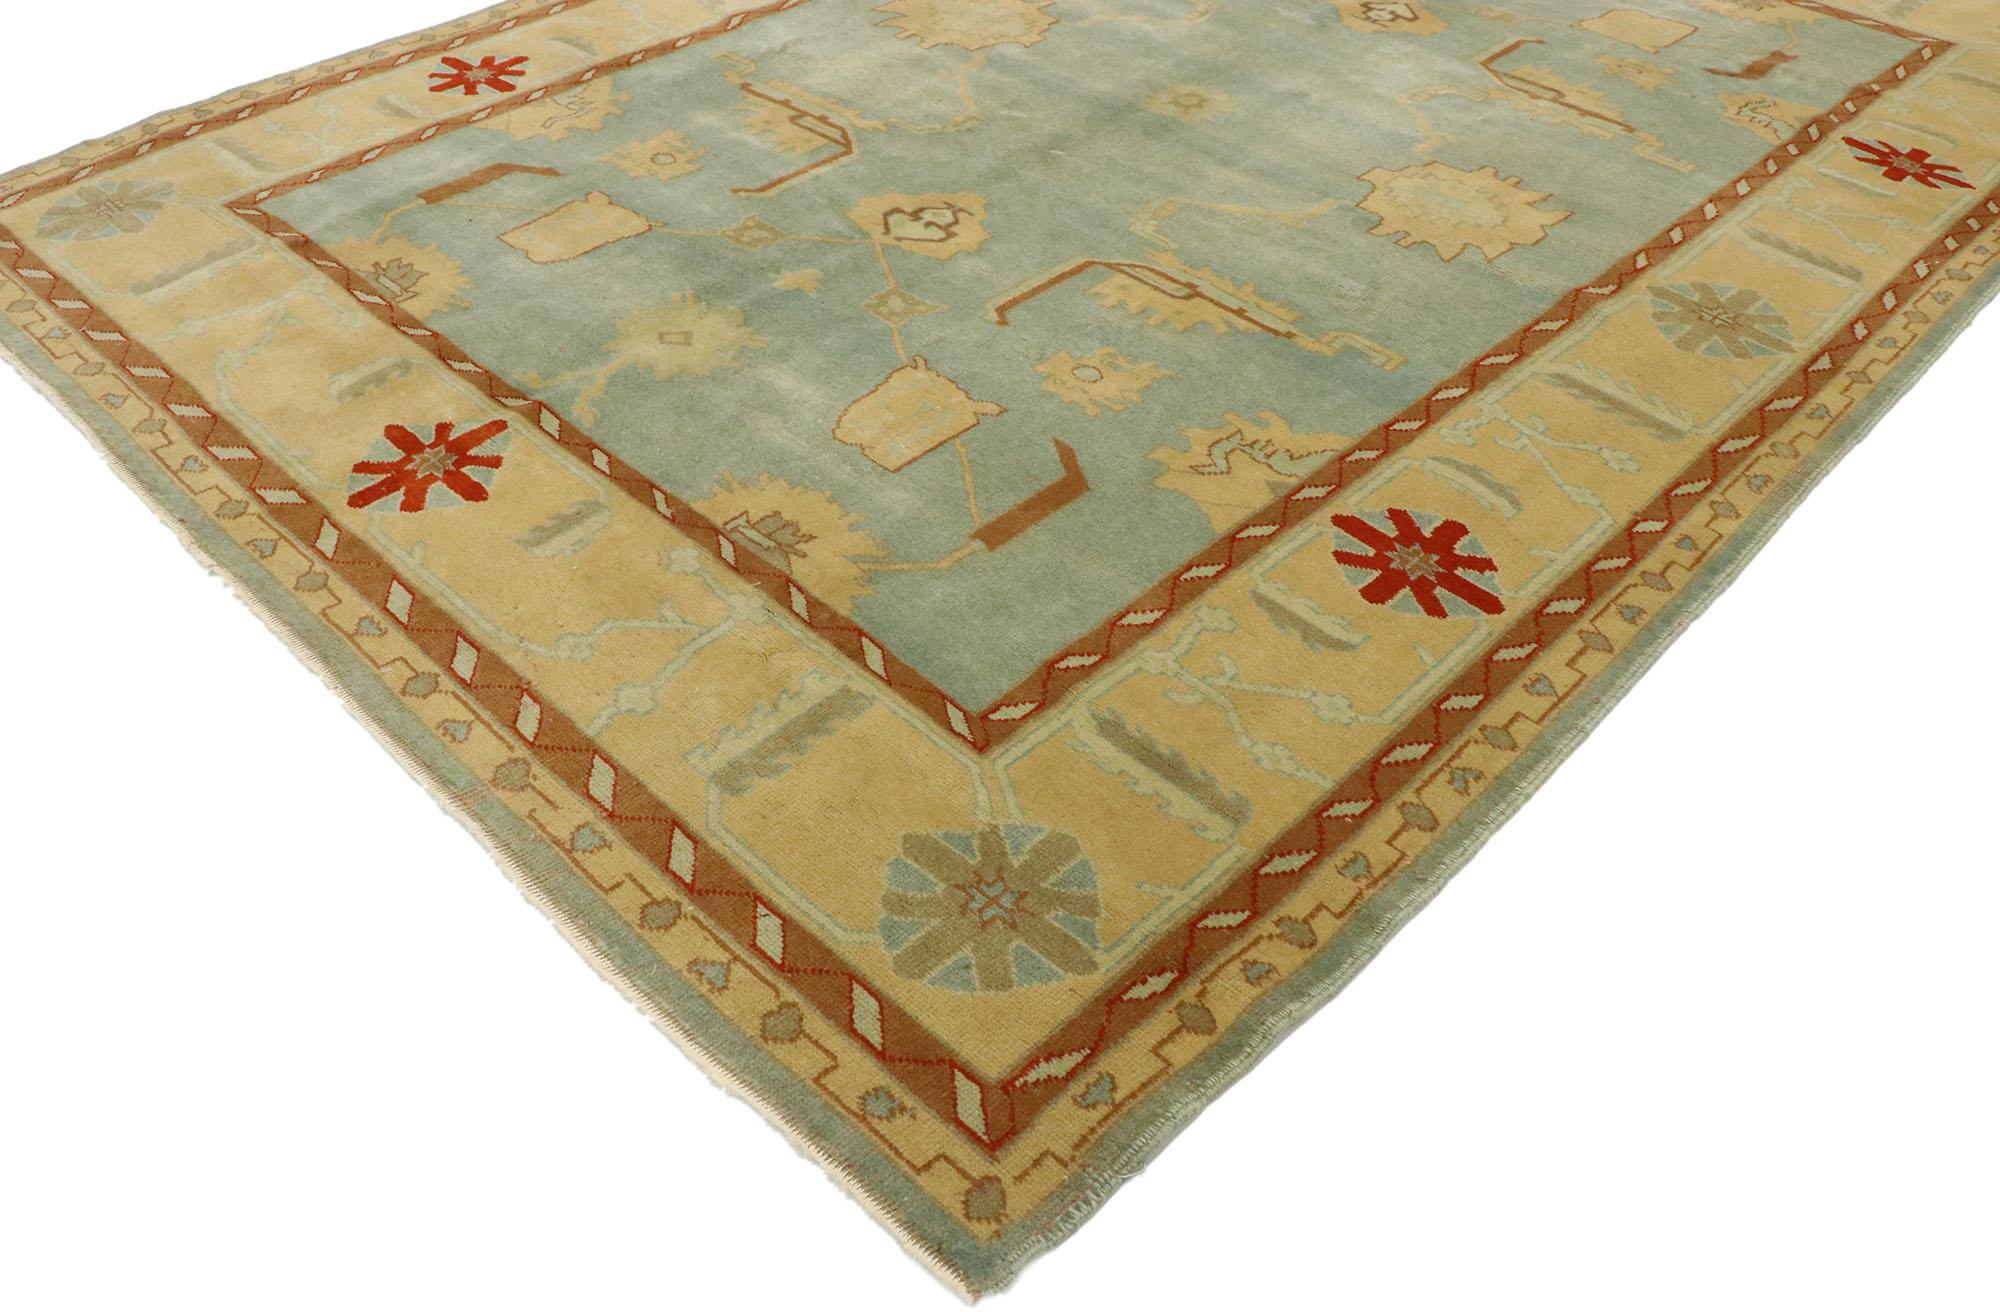 53080, vintage Turkish Oushak rug with Arts & Crafts style. Imbued with architectural elements of naturalistic forms in earthy-inspired colors, this hand knotted wool vintage Turkish Oushak rug beautifully embodies warm Arts & Crafts style. The